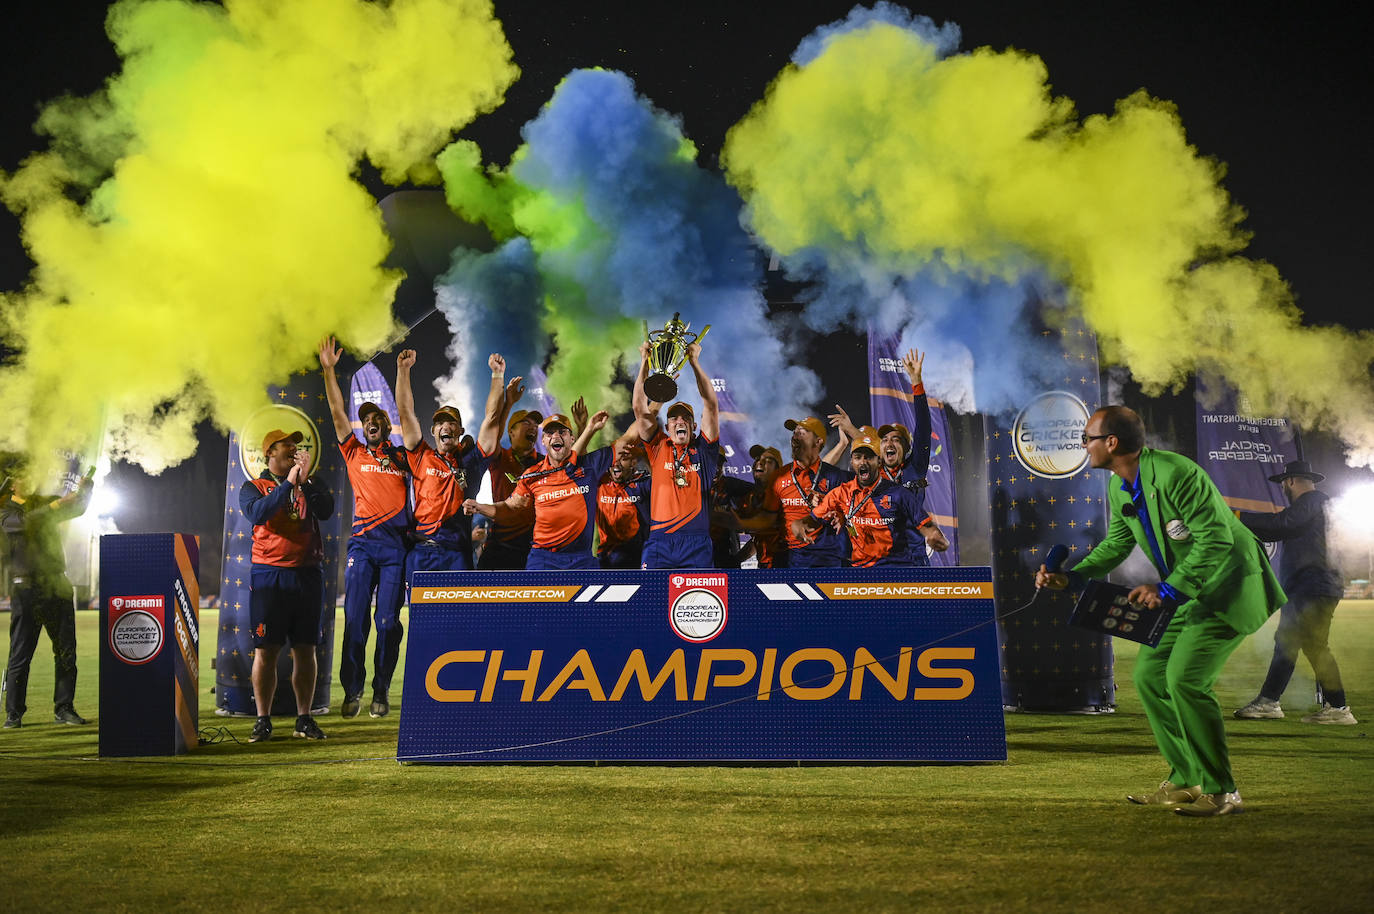 Netherlands XI beat England XI in the final by four wickets. 